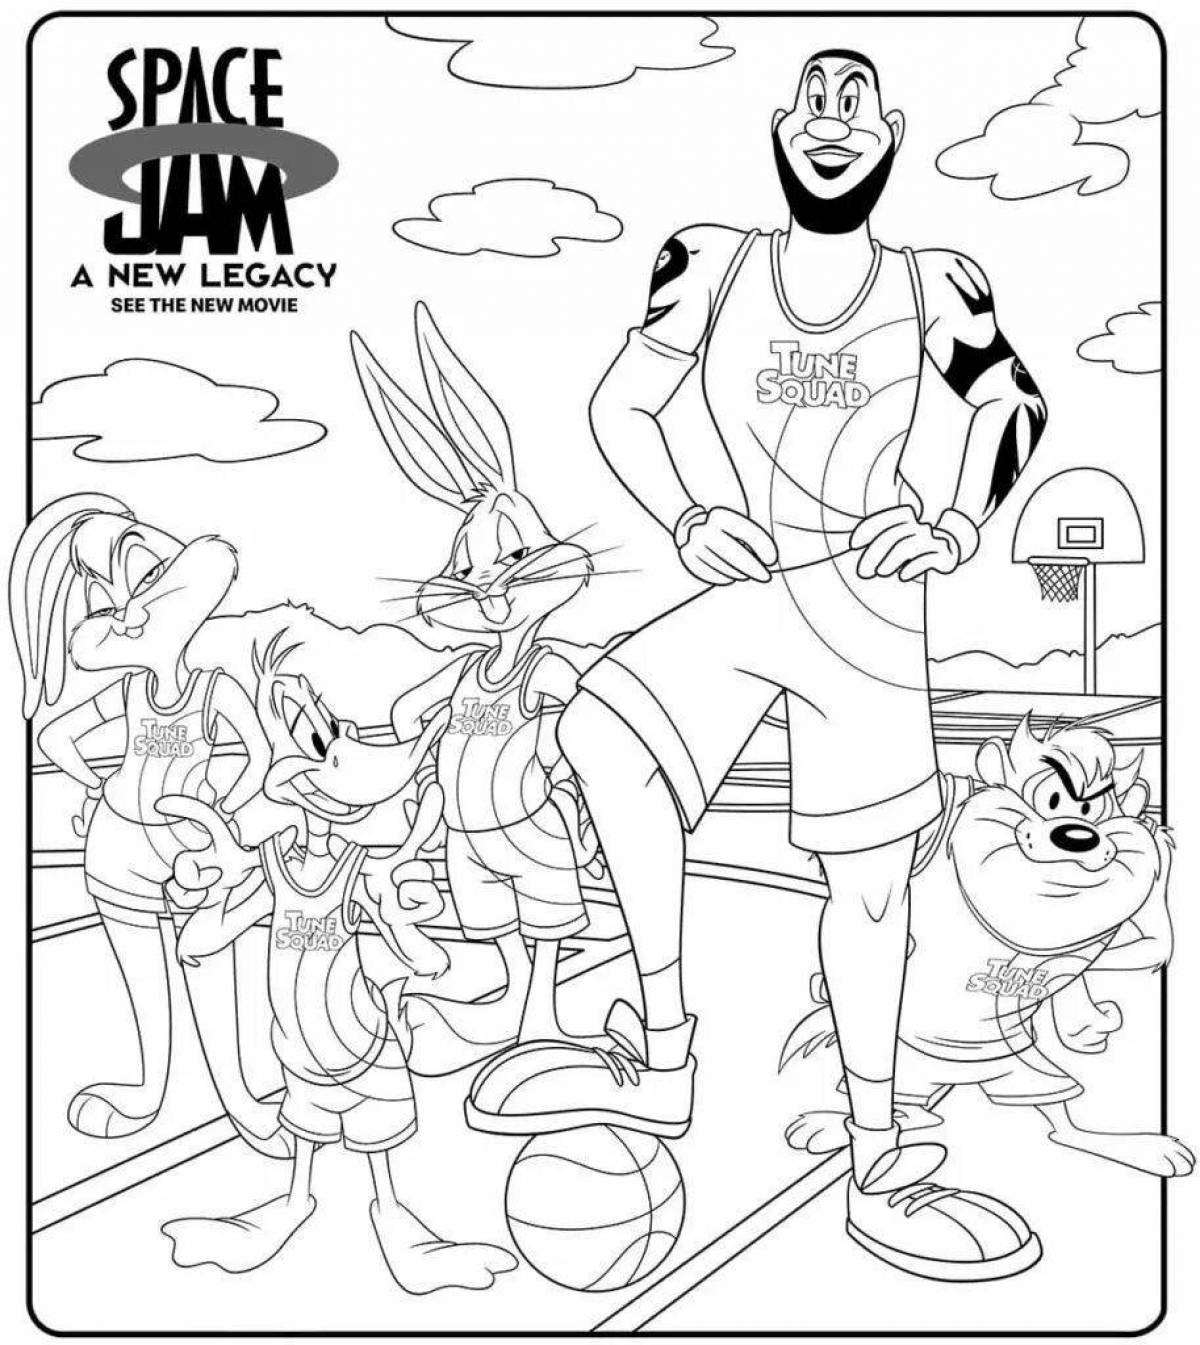 Coloring book funny space jam